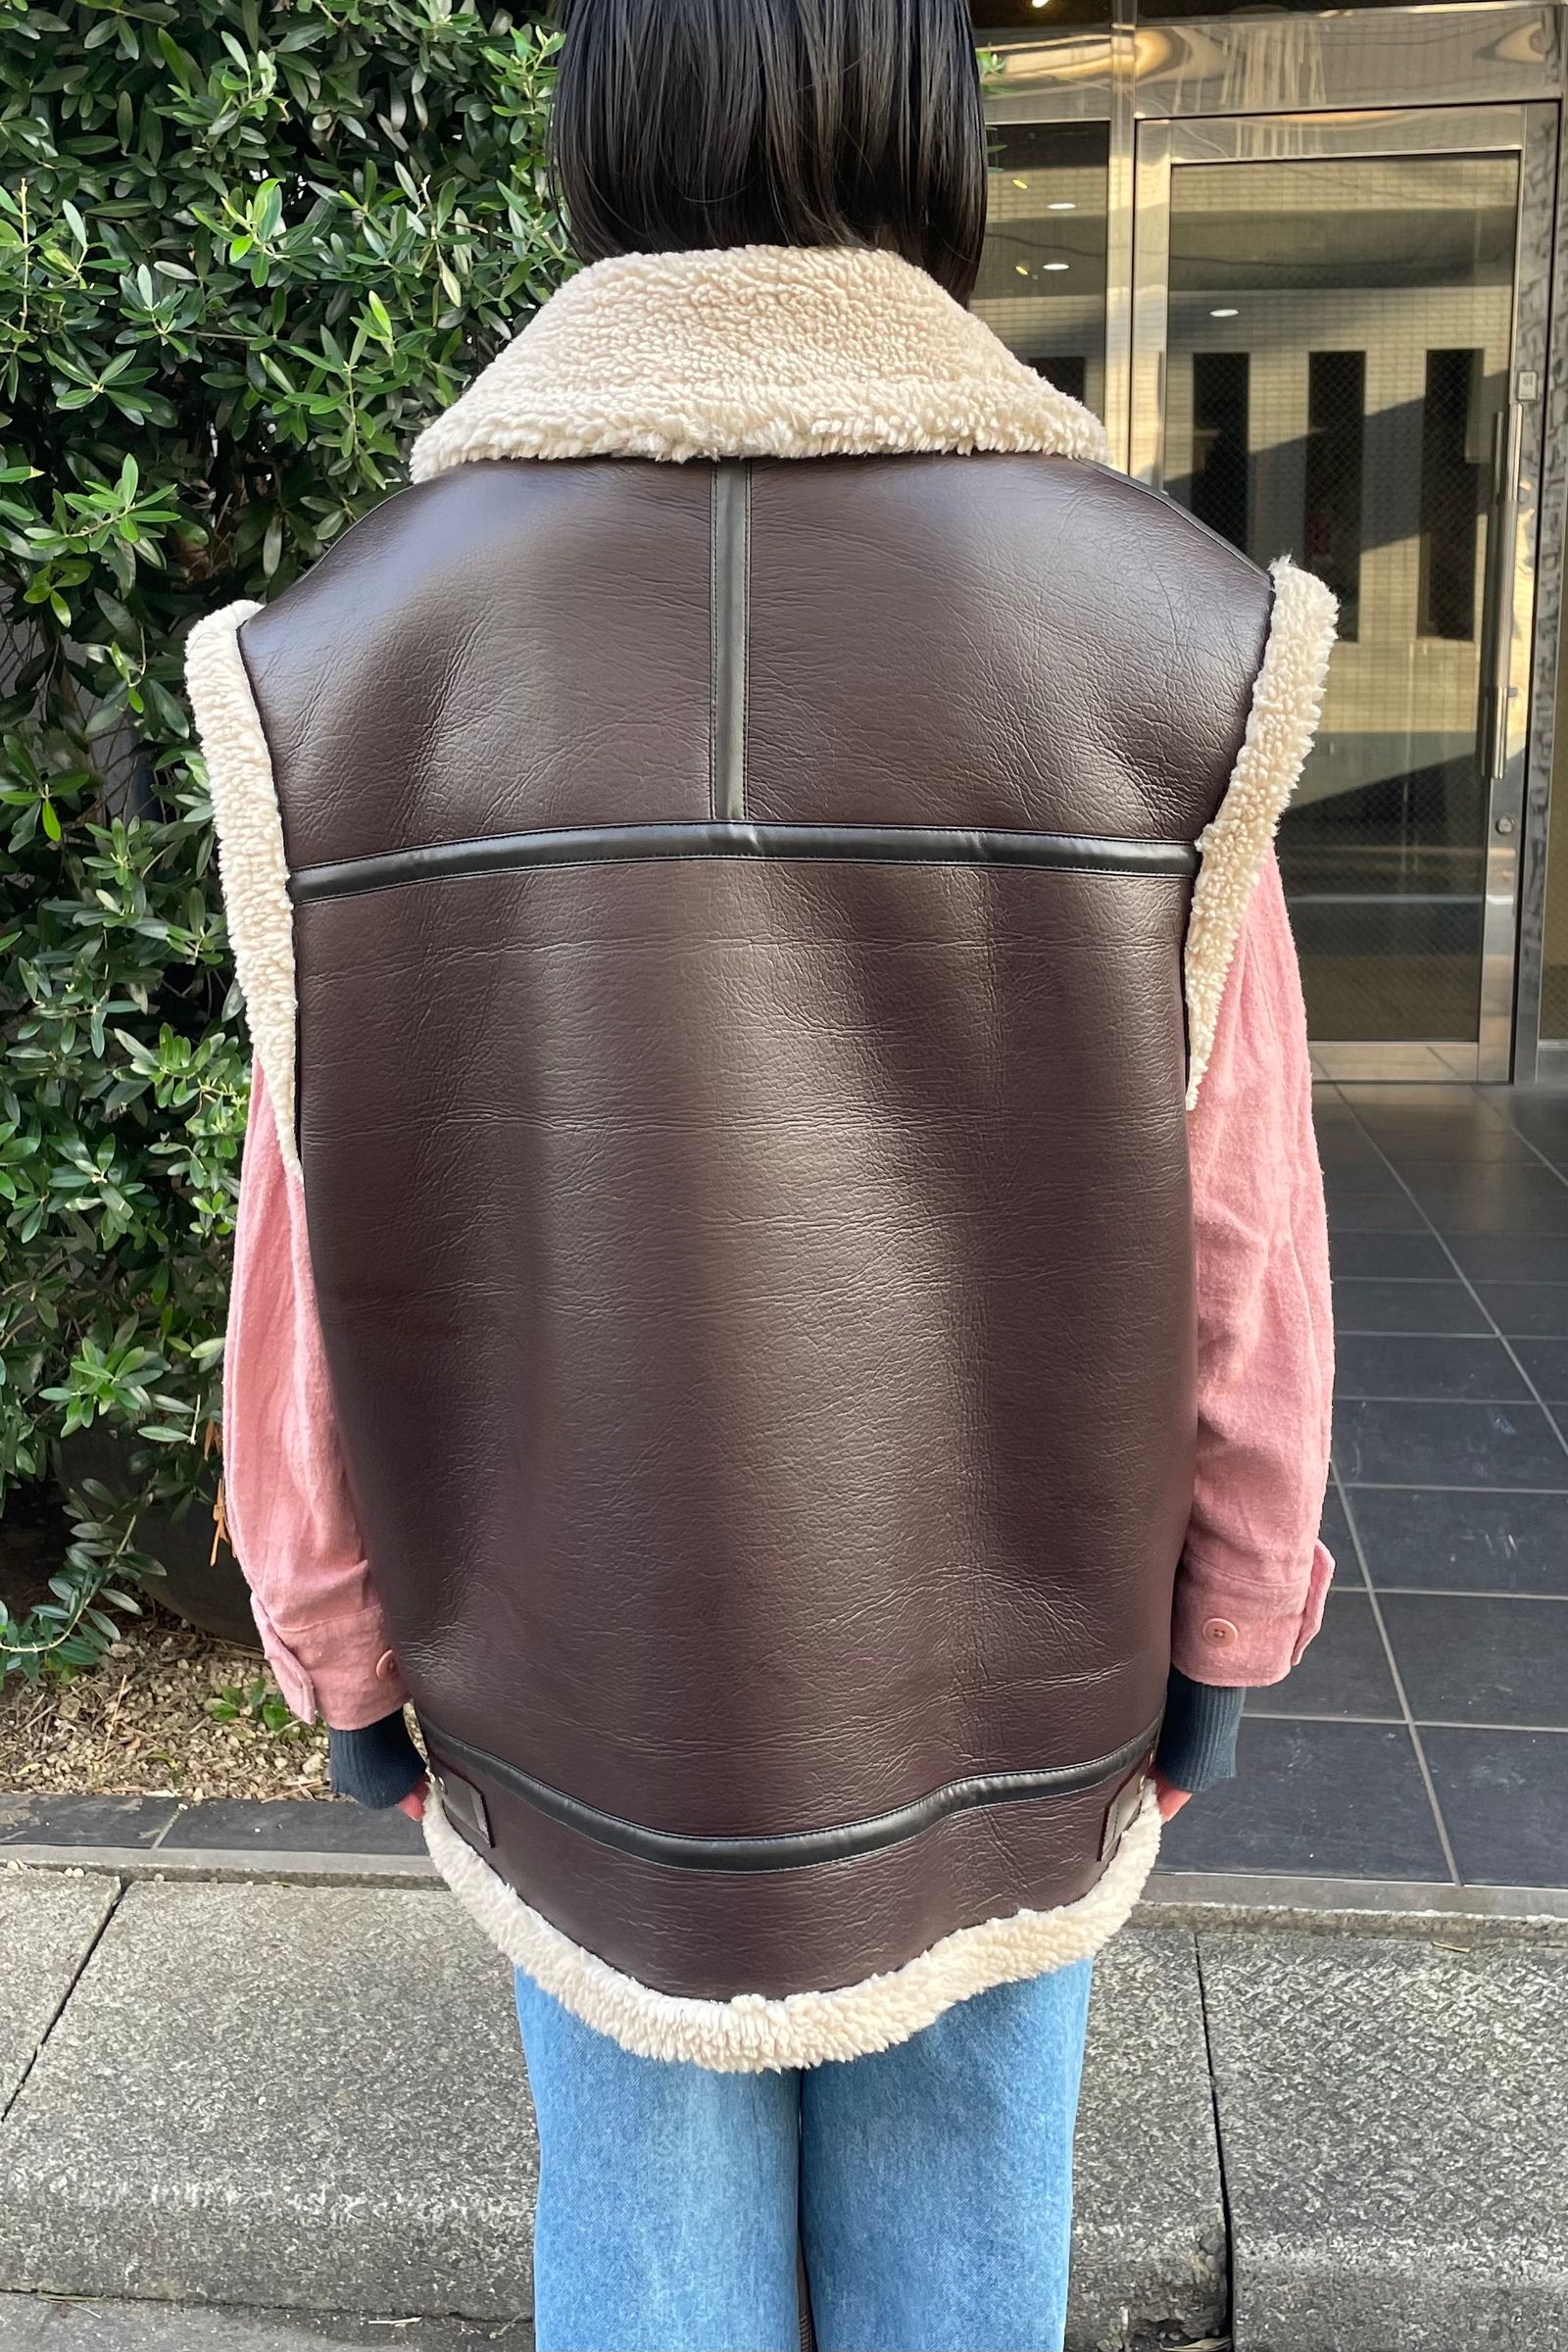 INSCRIRE - synthetic b-3 vest -brown- 22aw | asterisk